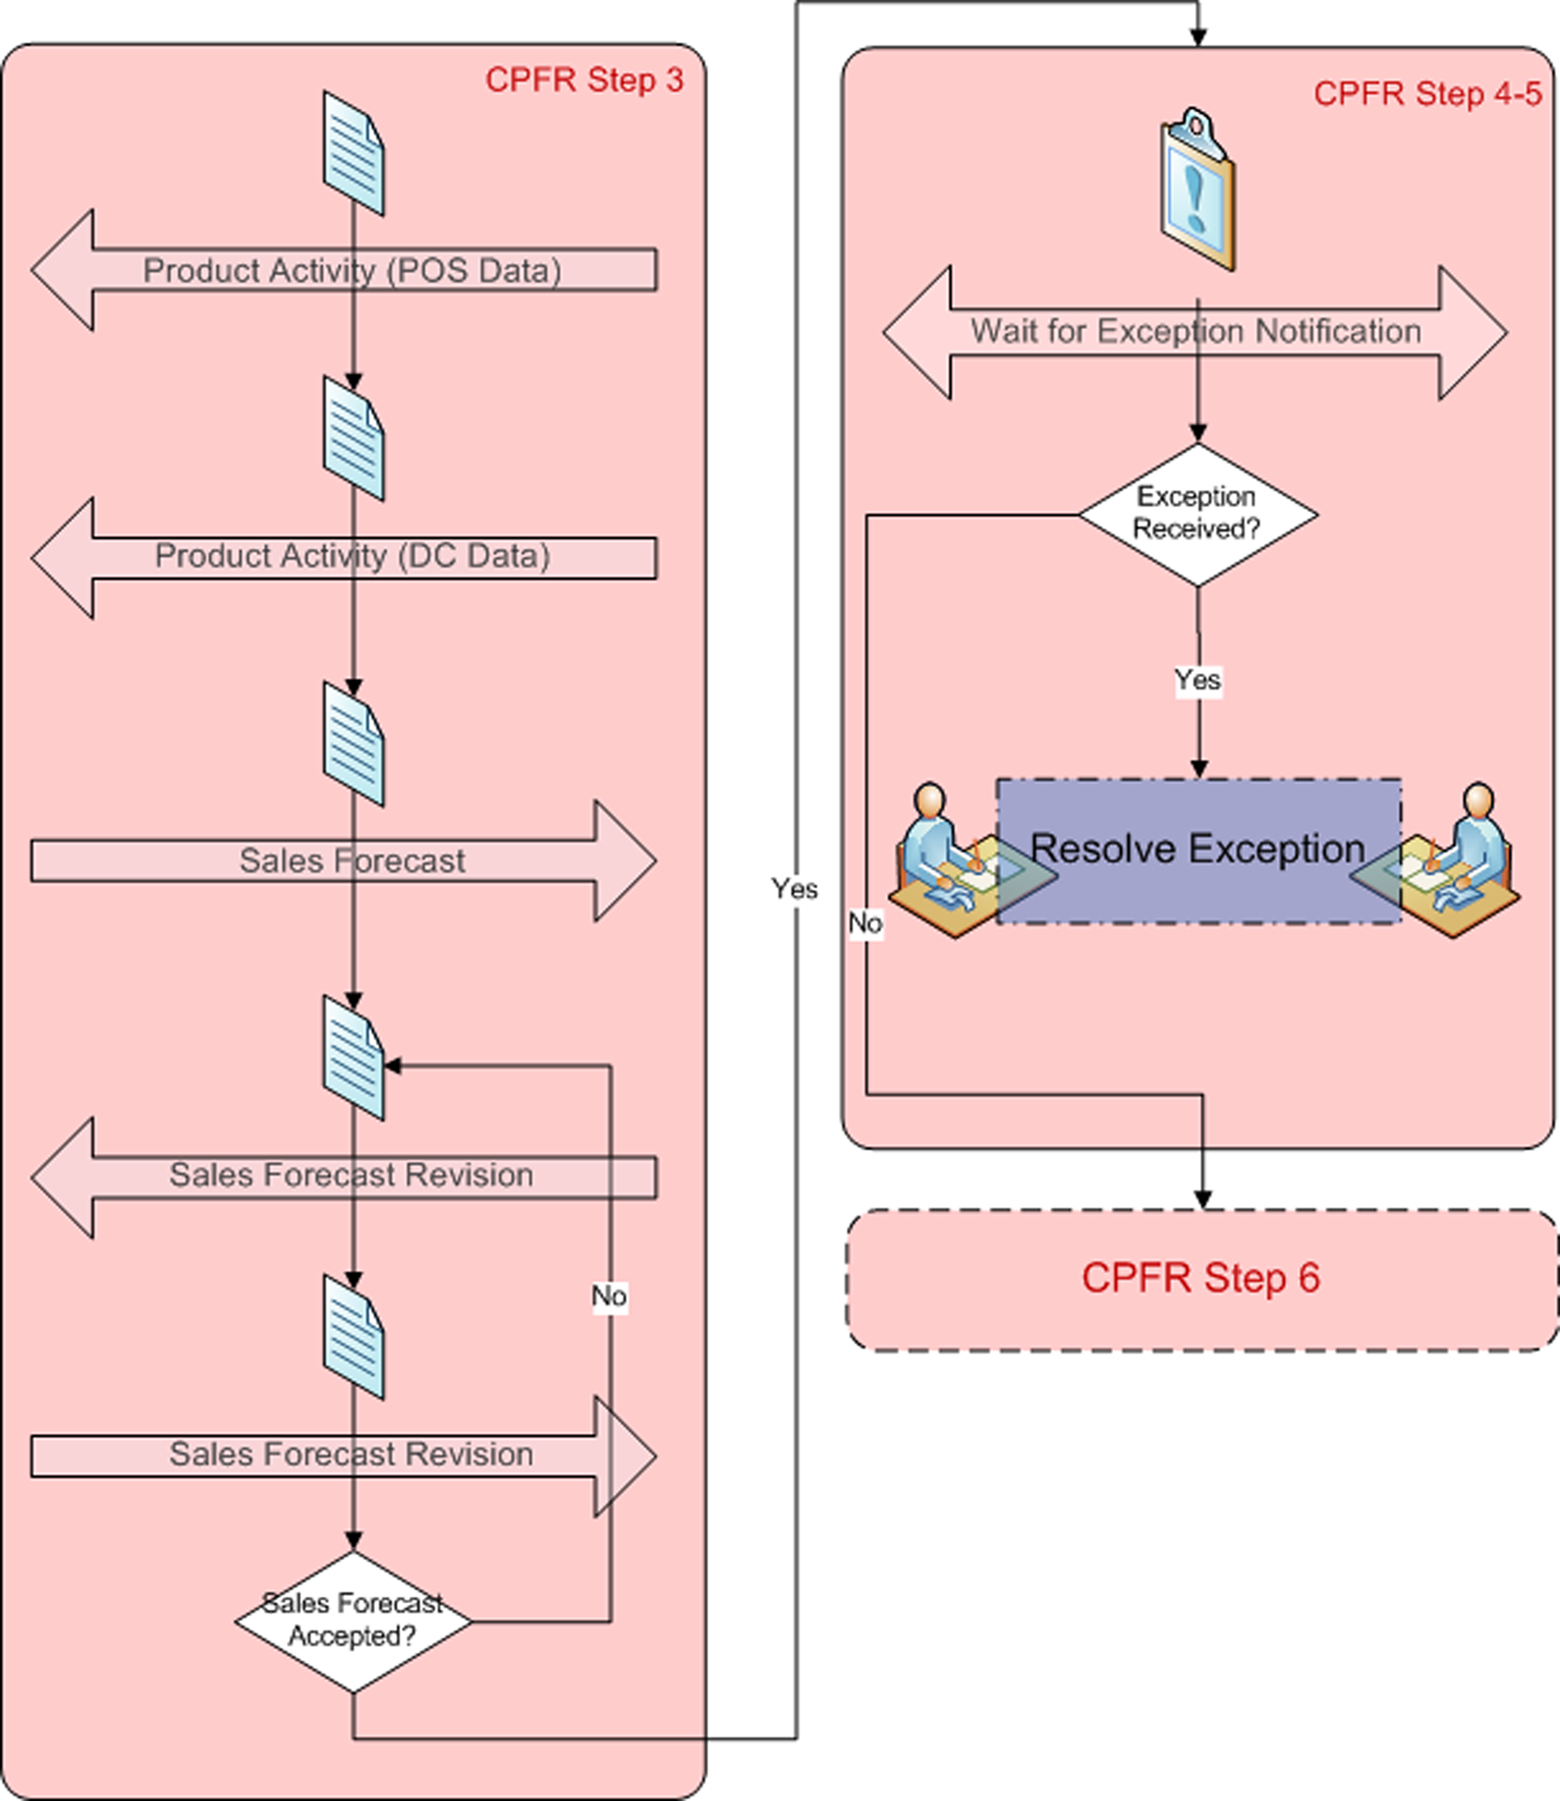 [CPFR Steps 3, 4, and 5 Diagram]